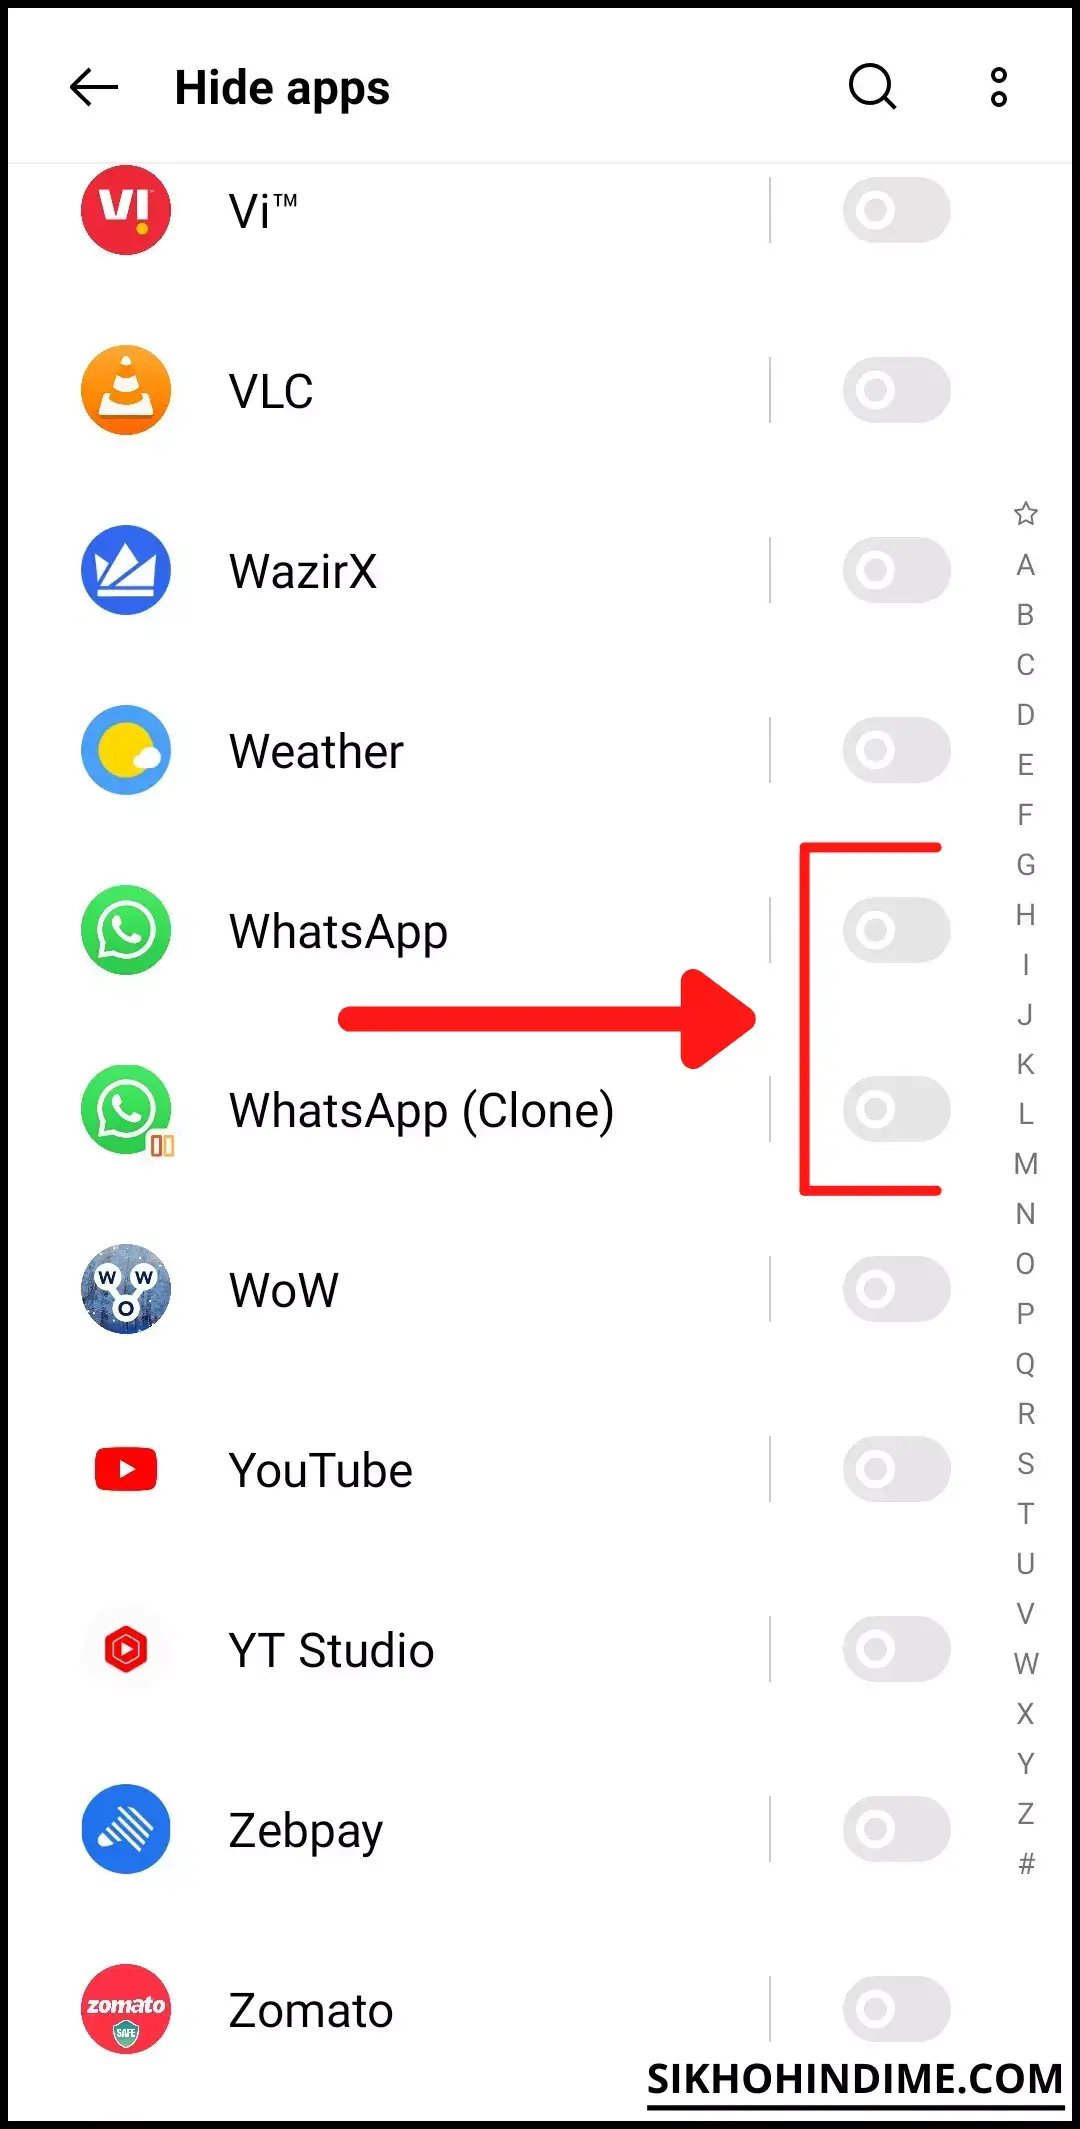 Click on enable button to hide apps